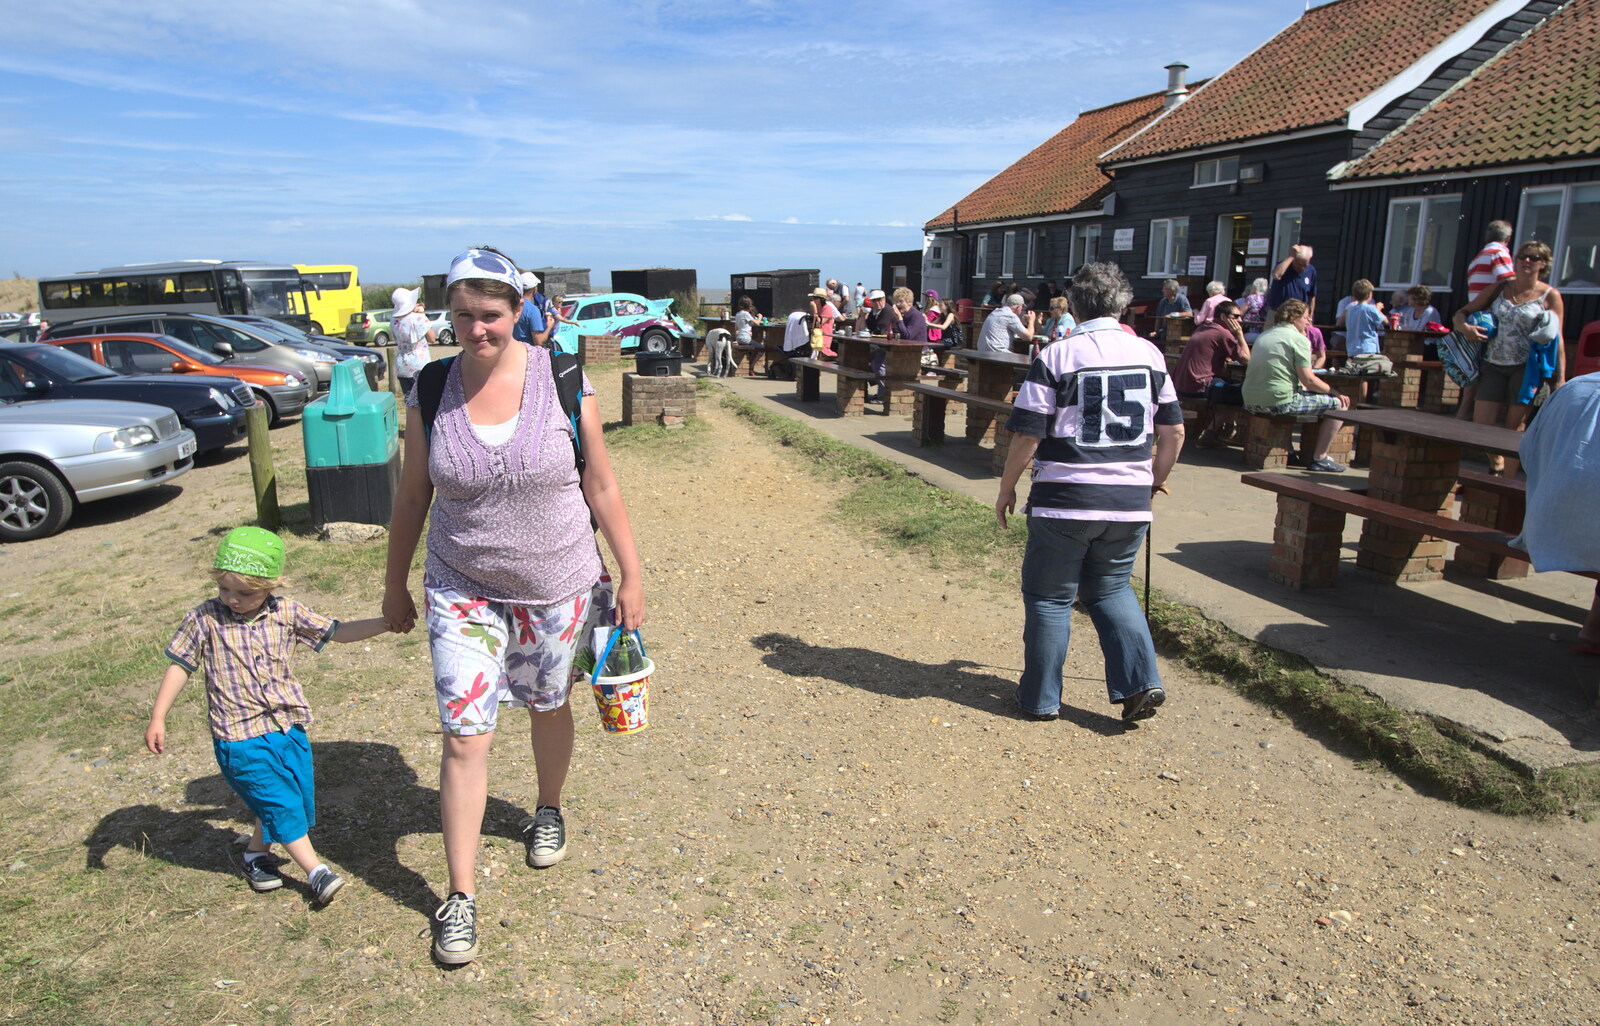 We head back from the chip shop from Camping by the Seaside, Cliff House, Dunwich, Suffolk - 15th August 2012